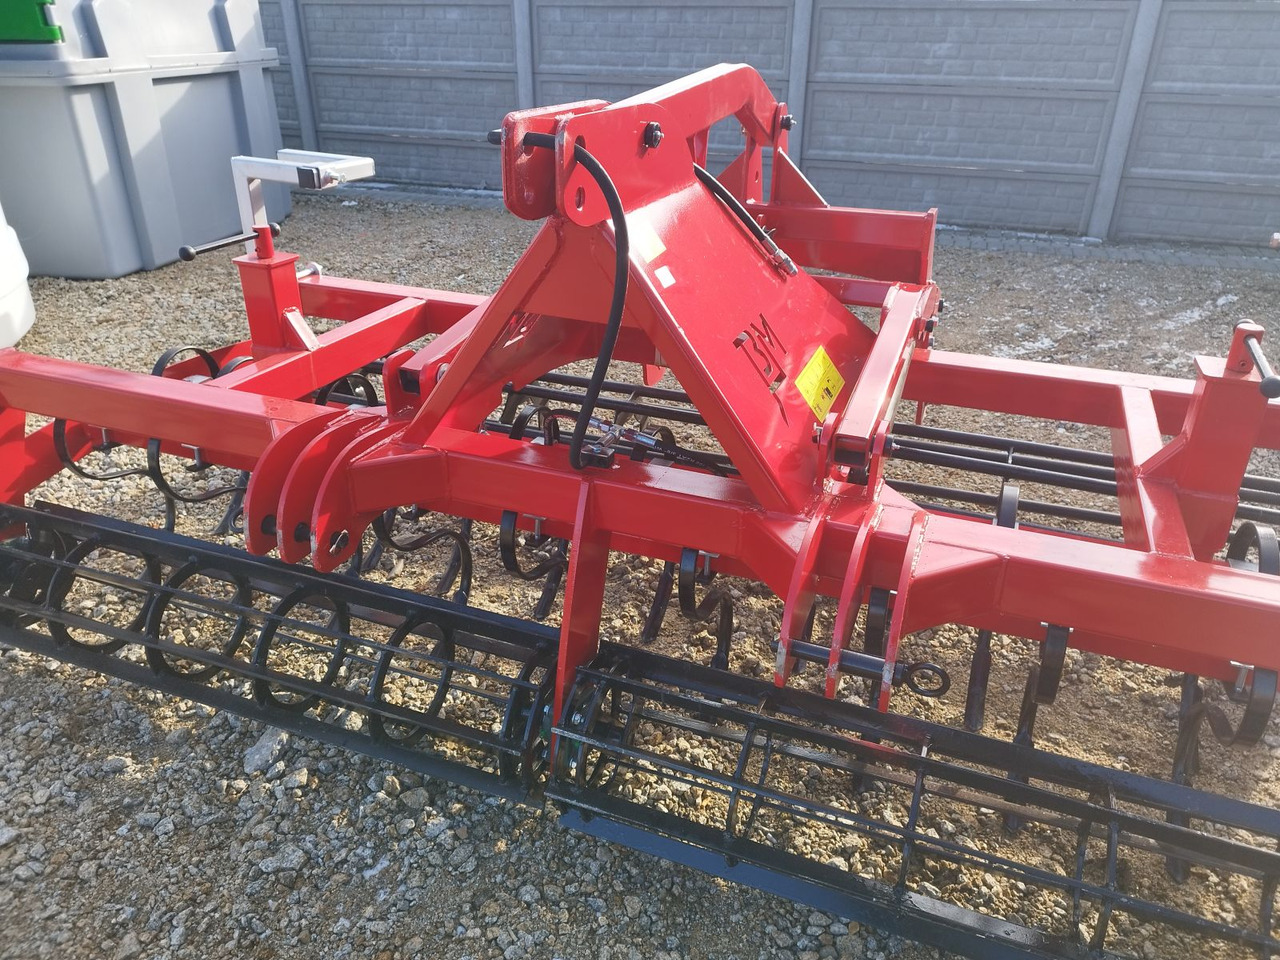 New Combine seed drill Combine Seed Drill 2,7m / Säkombination / Agregat Uprawowo Siewny: picture 6